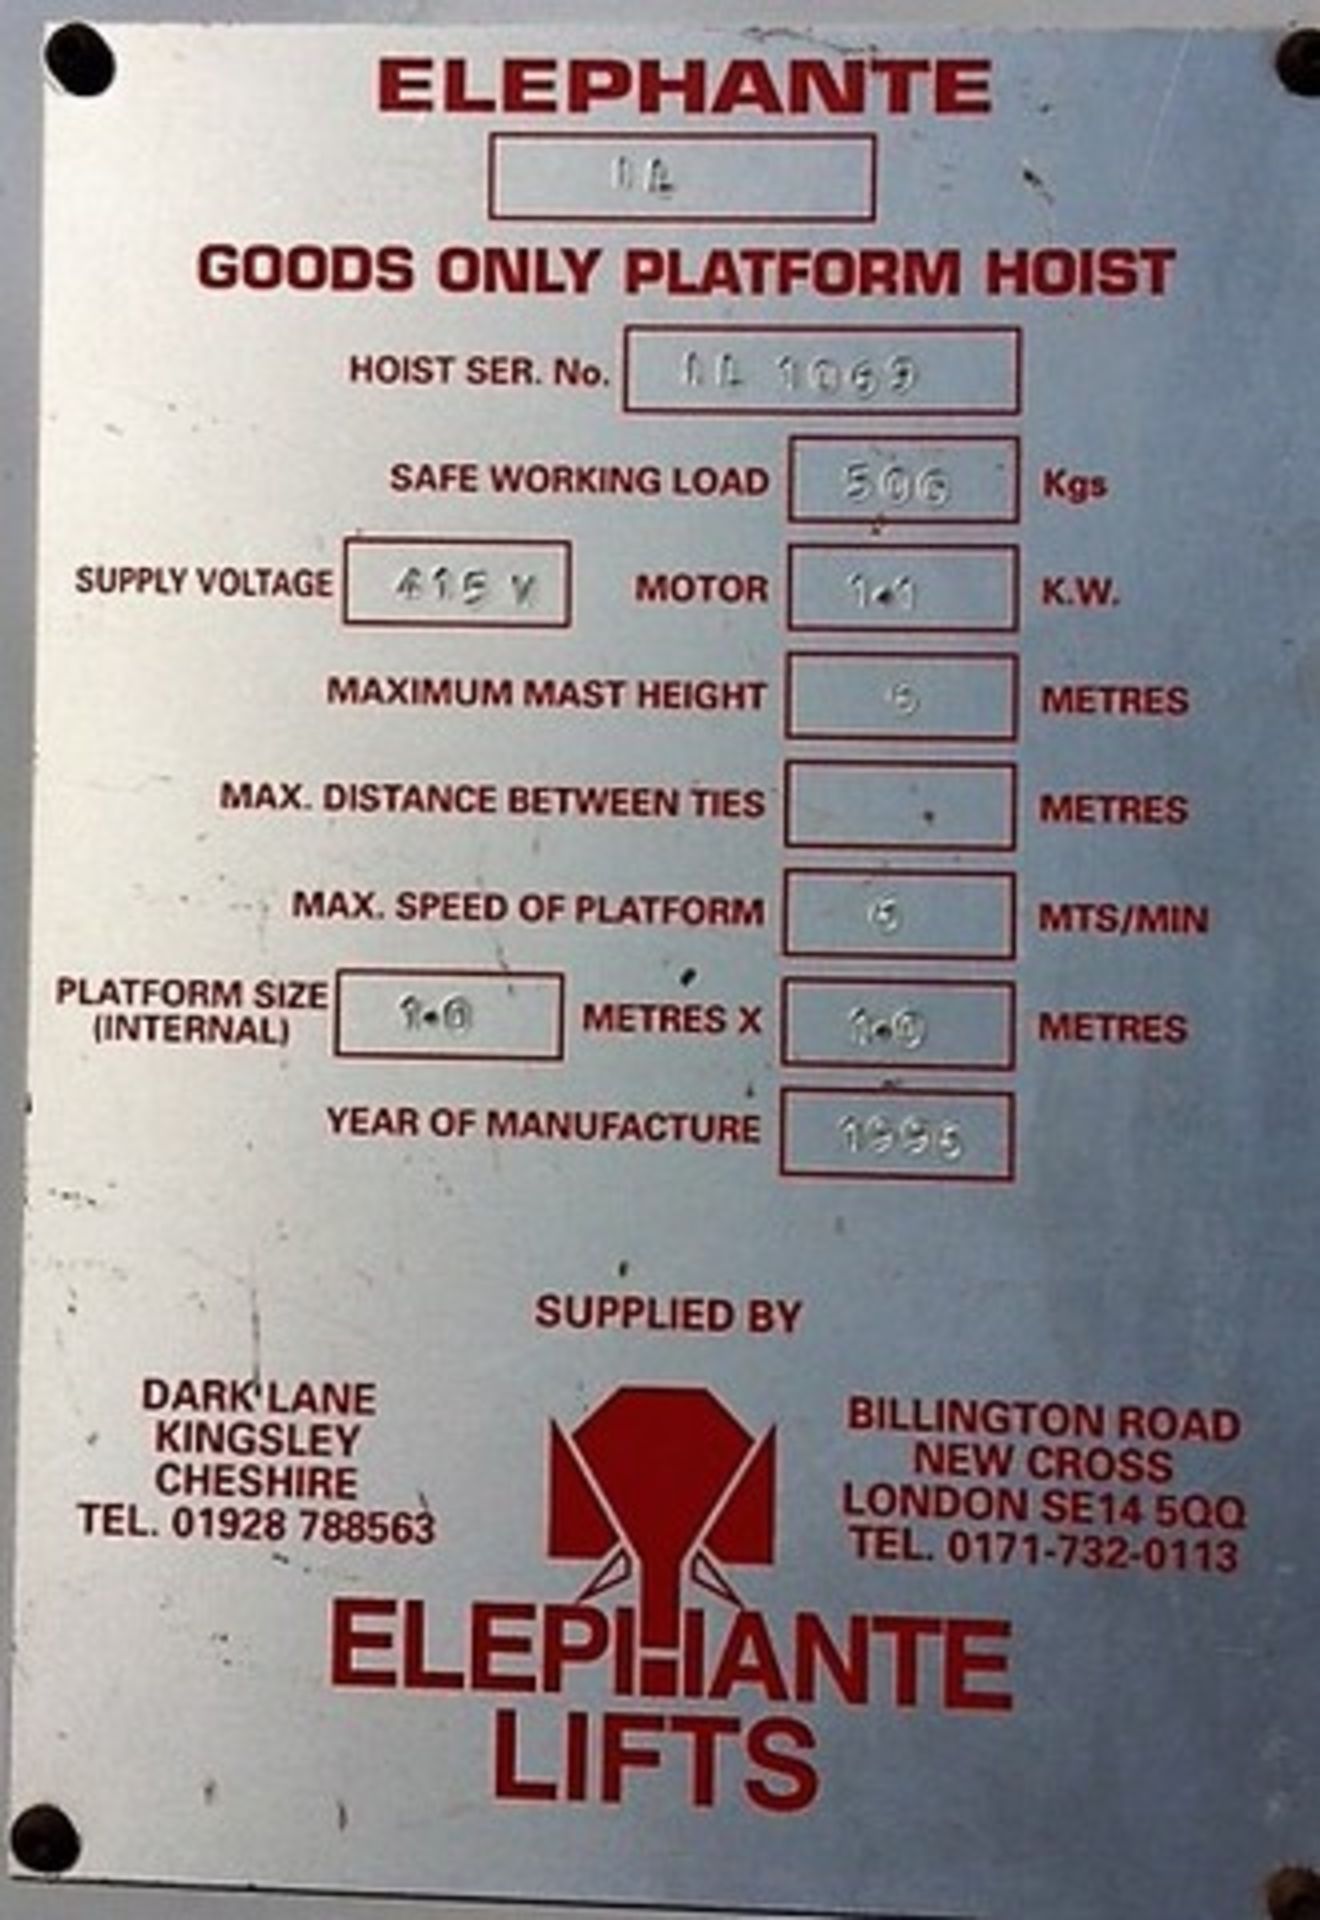 1996 ELEPHANTE goods only lift. Safe working load 500kg. S/N 1L1069. Supply voltage 415. Max mast he - Image 2 of 5